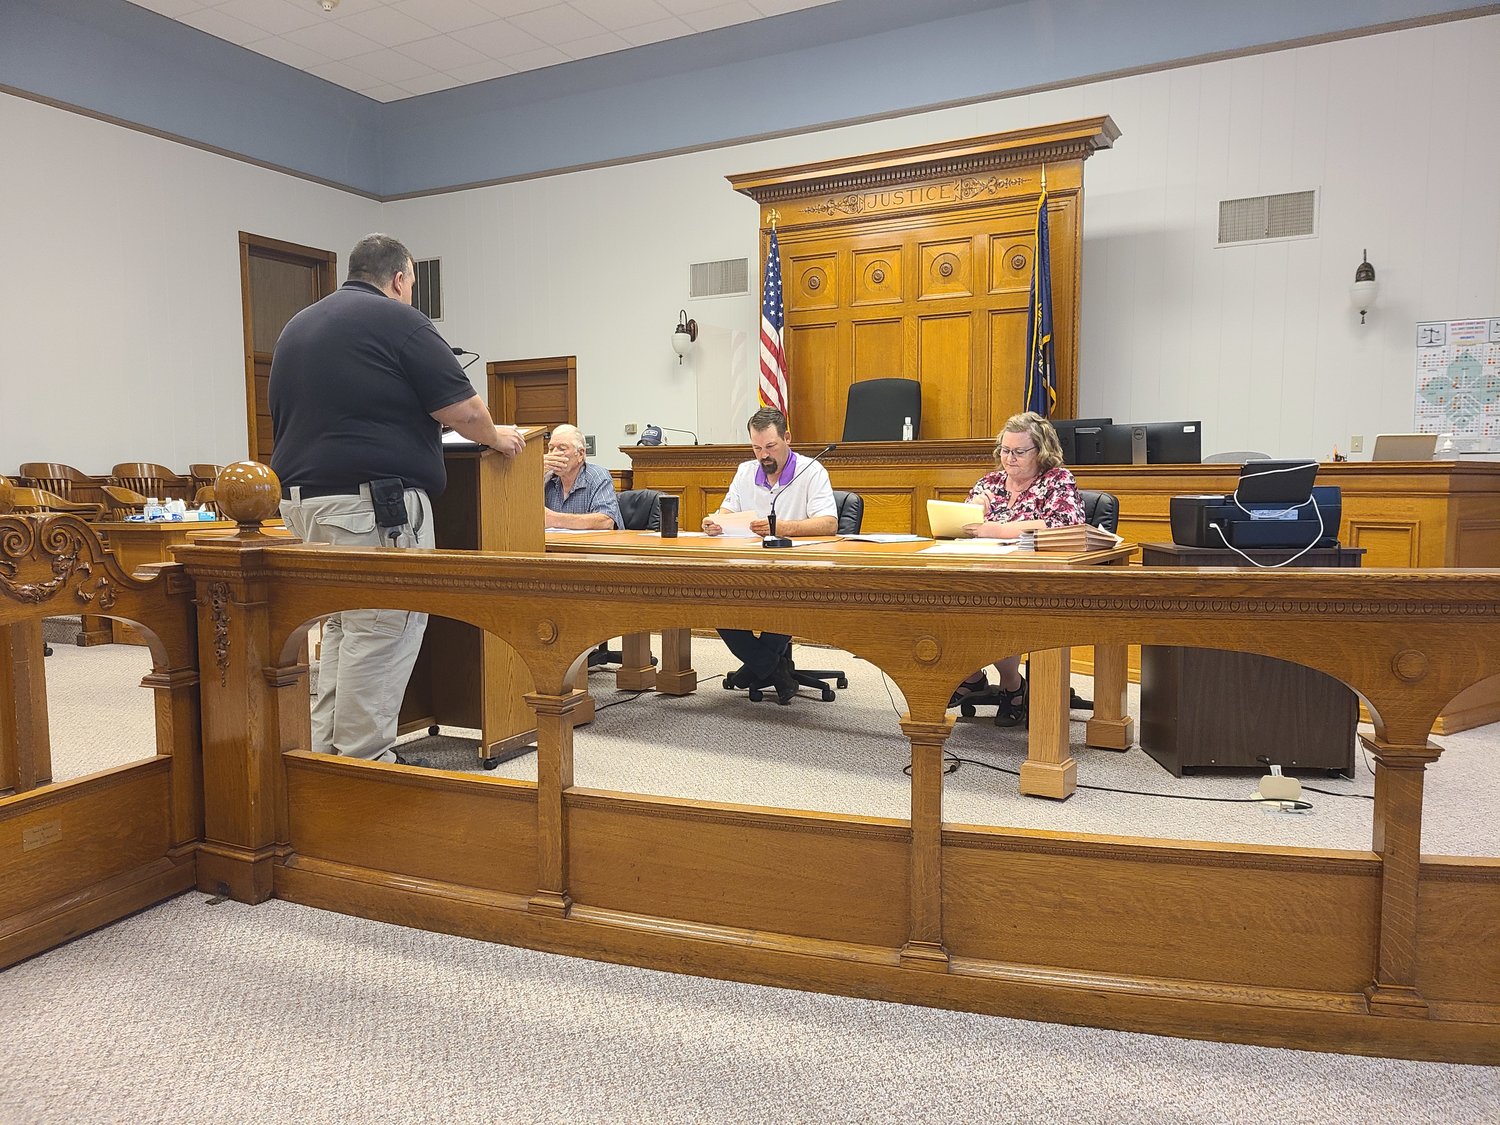 Wayne County Emergency Manager Nic Kemnitz spoke to the Wayne County Commissioners on the upcoming Missouri River Outdoor Expo.